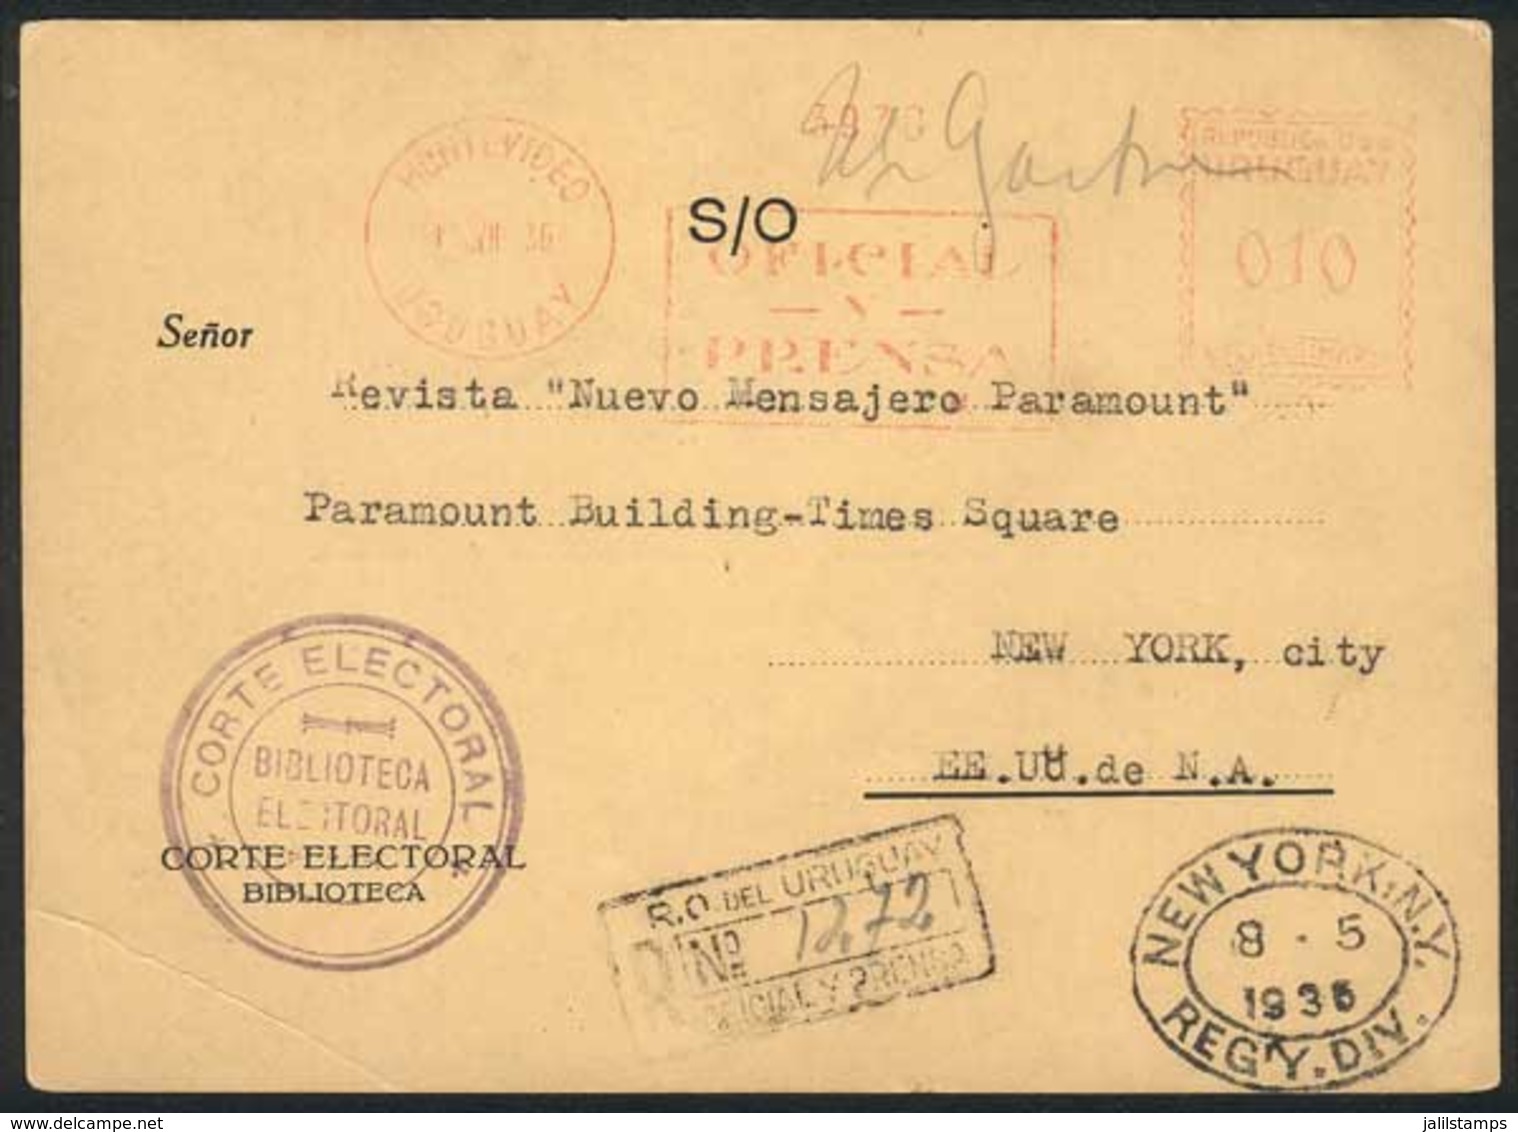 URUGUAY: Card Of The Library "Corte Electoral" Sent Registered To USA On 1/JUL/1936, With Meter Postage Of 10c. Along "O - Uruguay